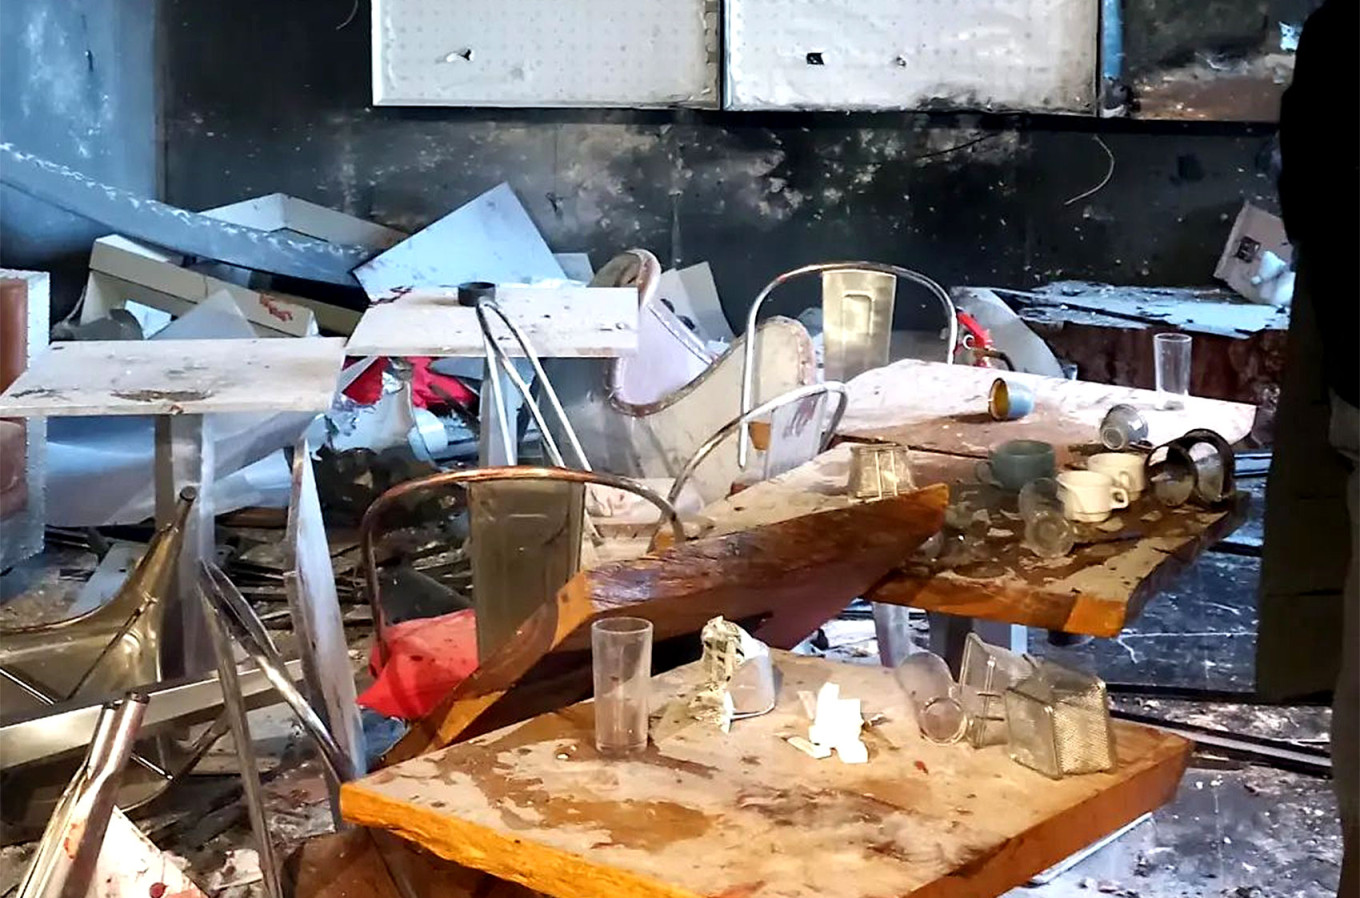 
					The aftermath of the explosion in Street Food Bar No. 1.					 					Provided by Eduard Omelchenko				